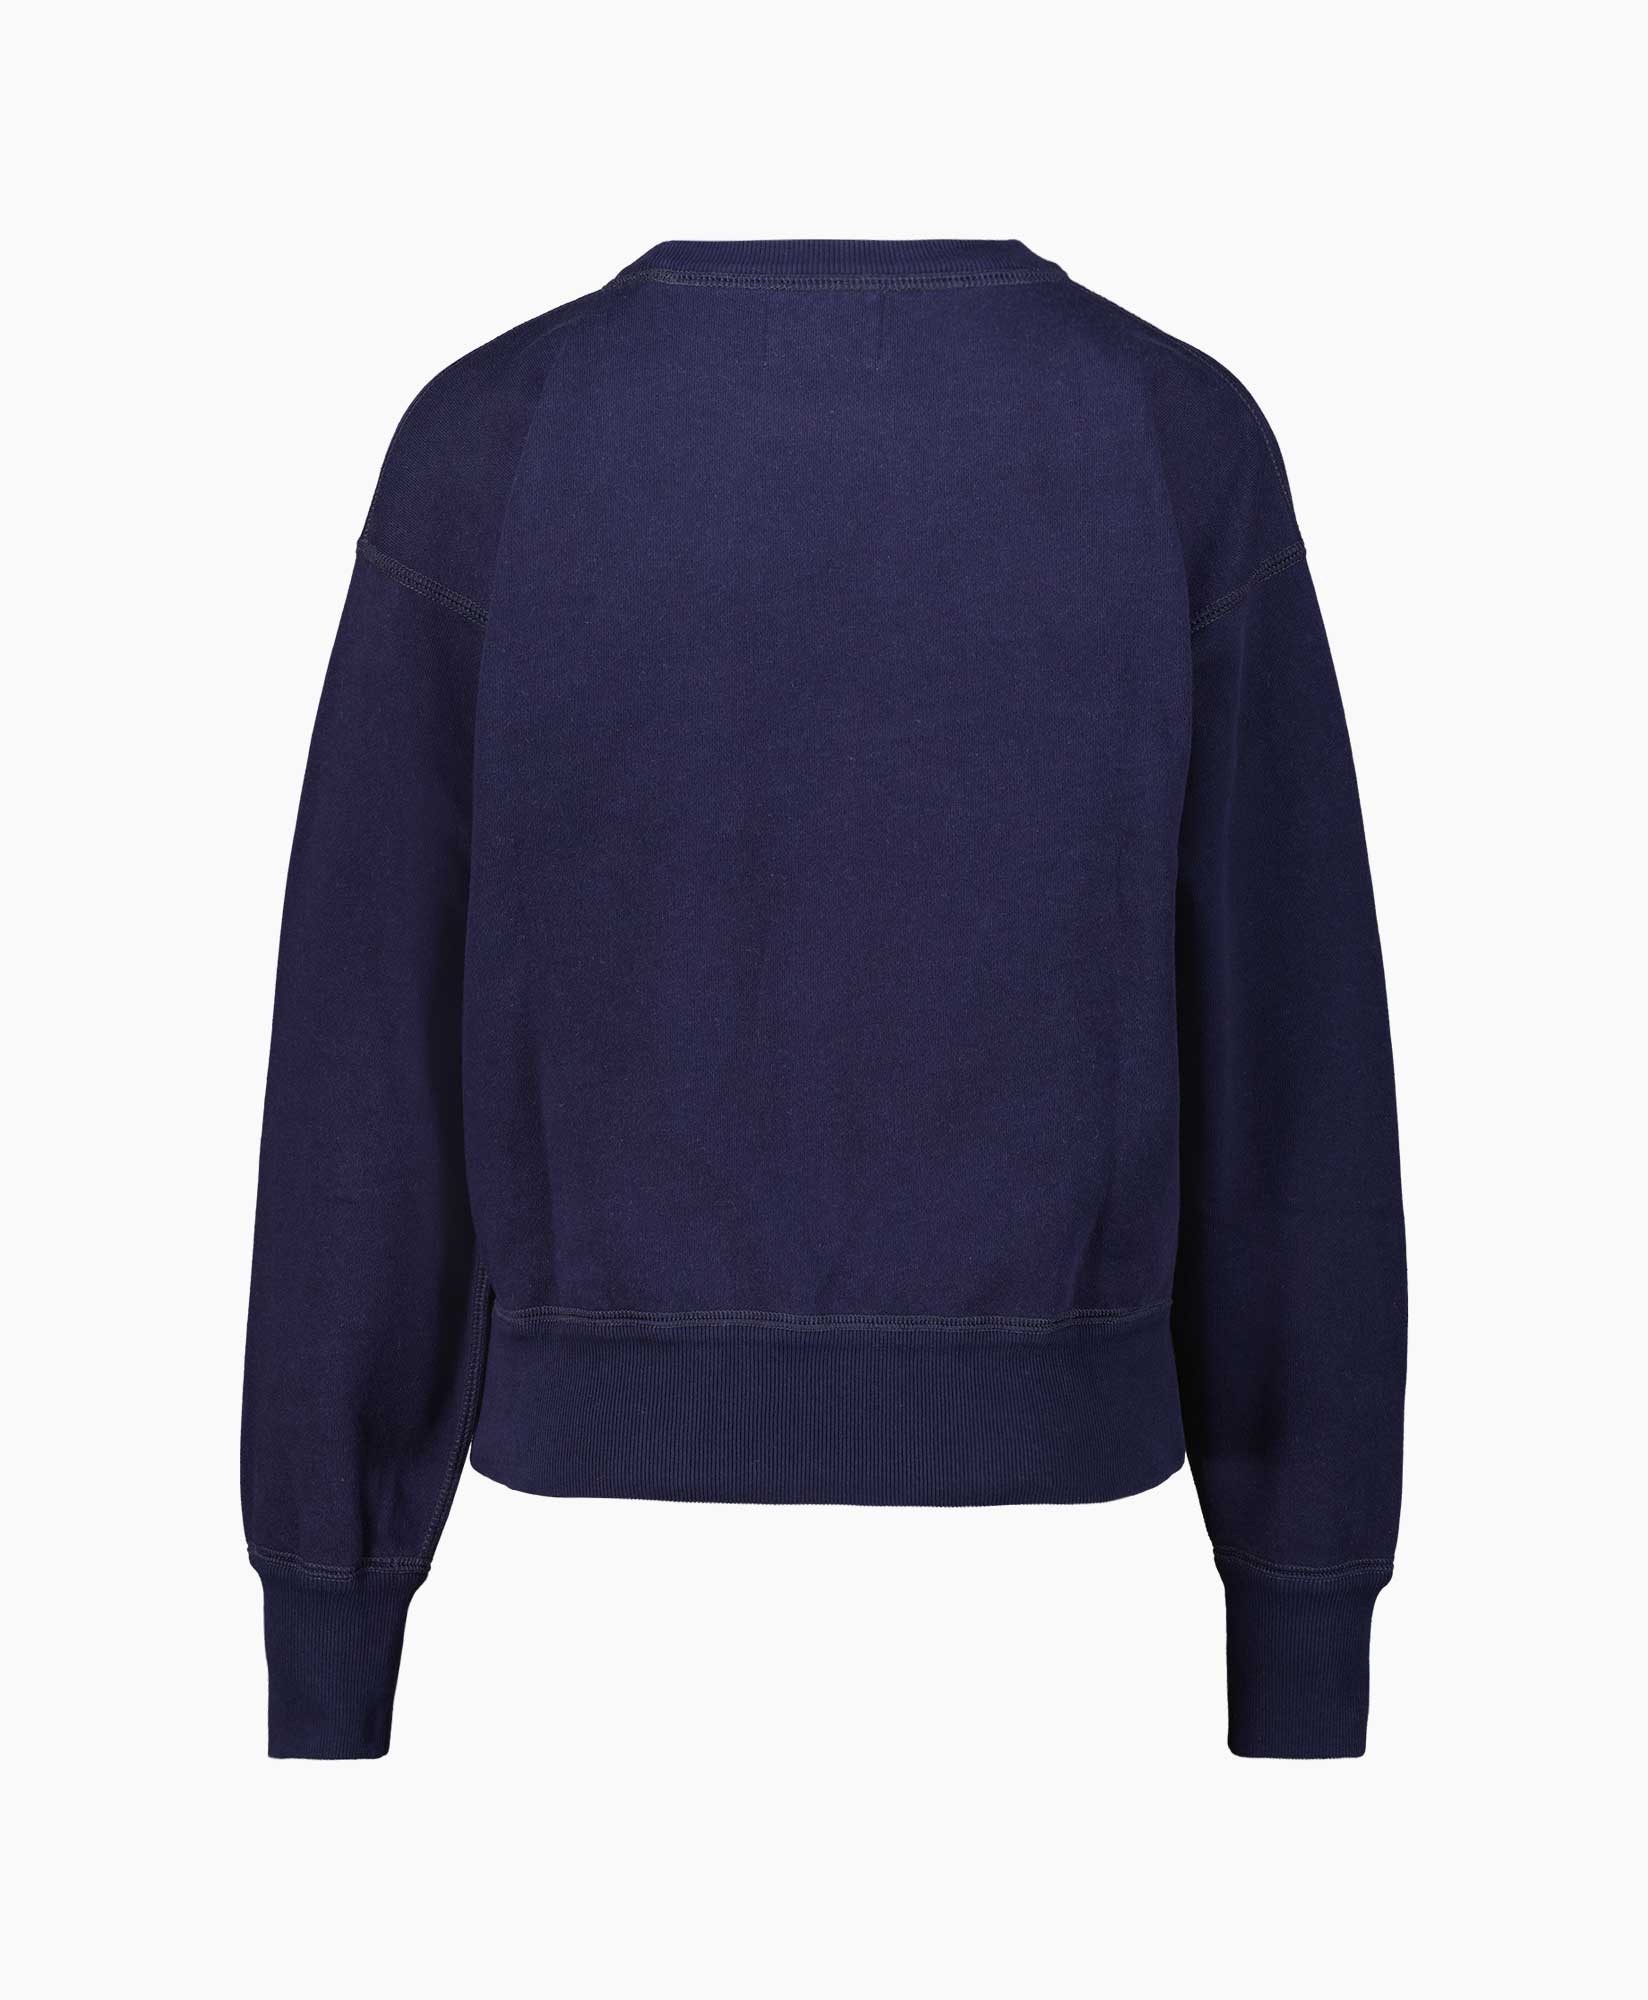 Sweater Mobyli Donker Blauw